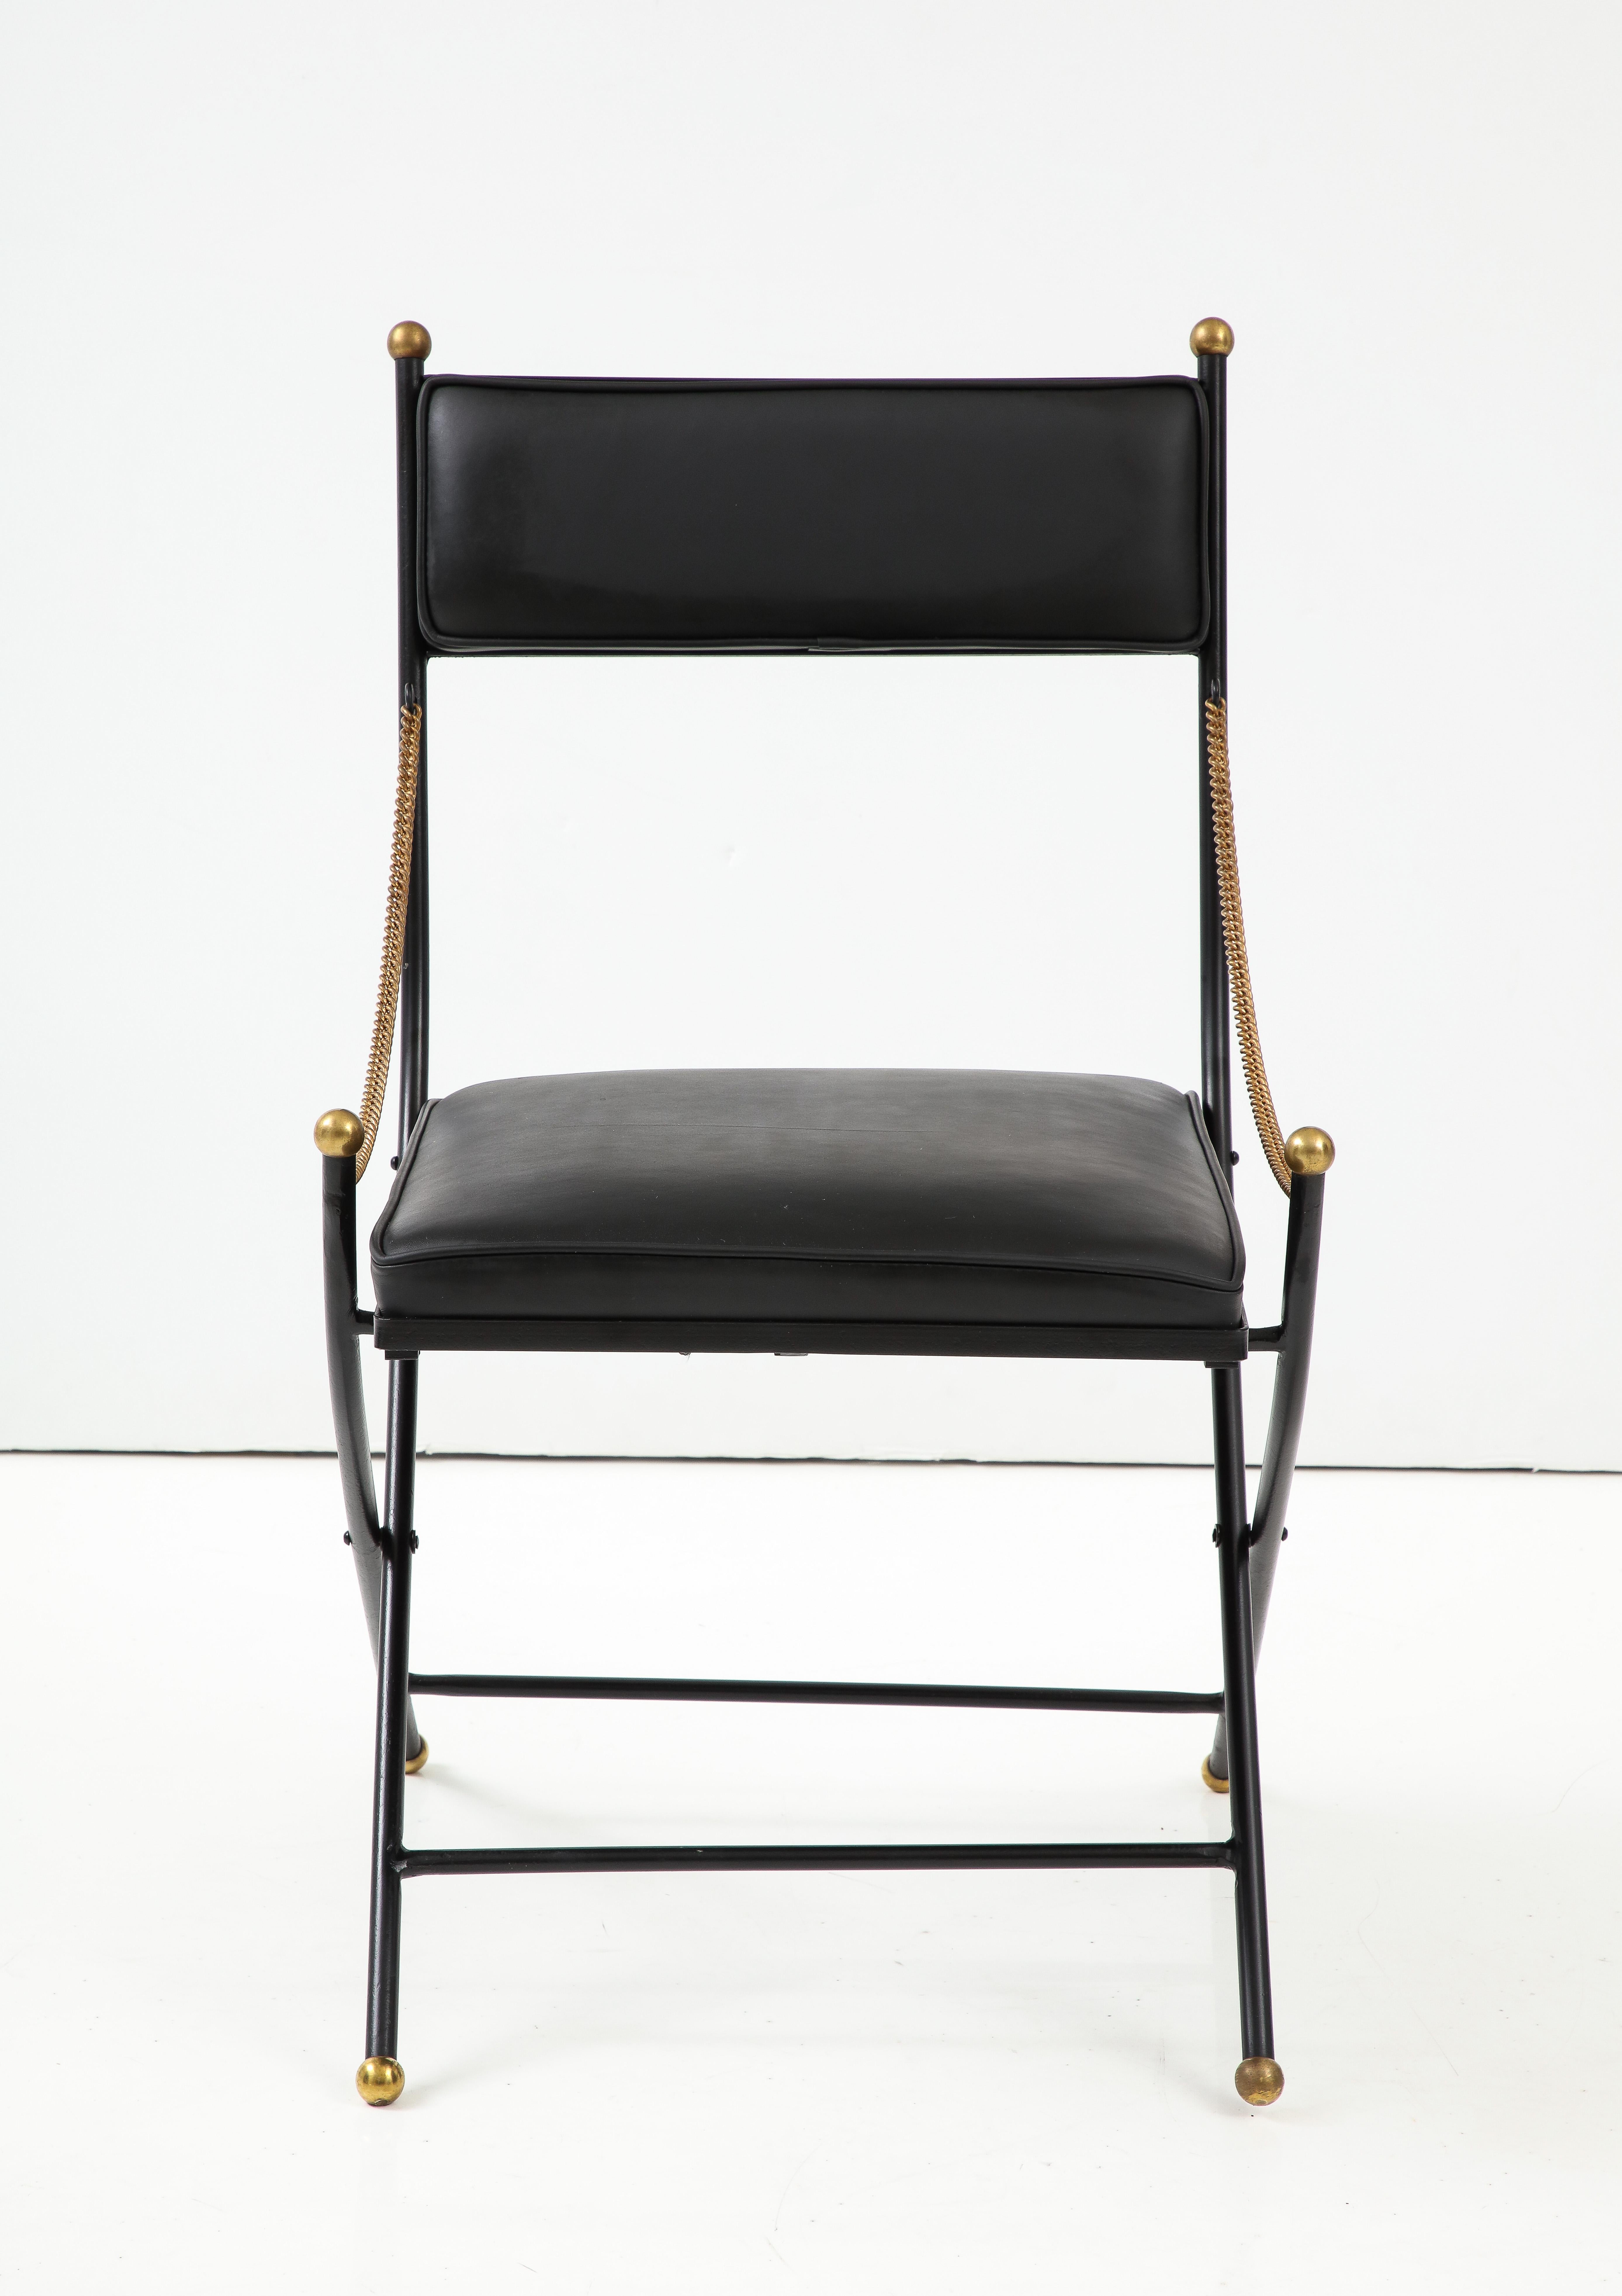 1950's French Iron And Brass Folding Dining Chairs In Leather Upholstery For Sale 9